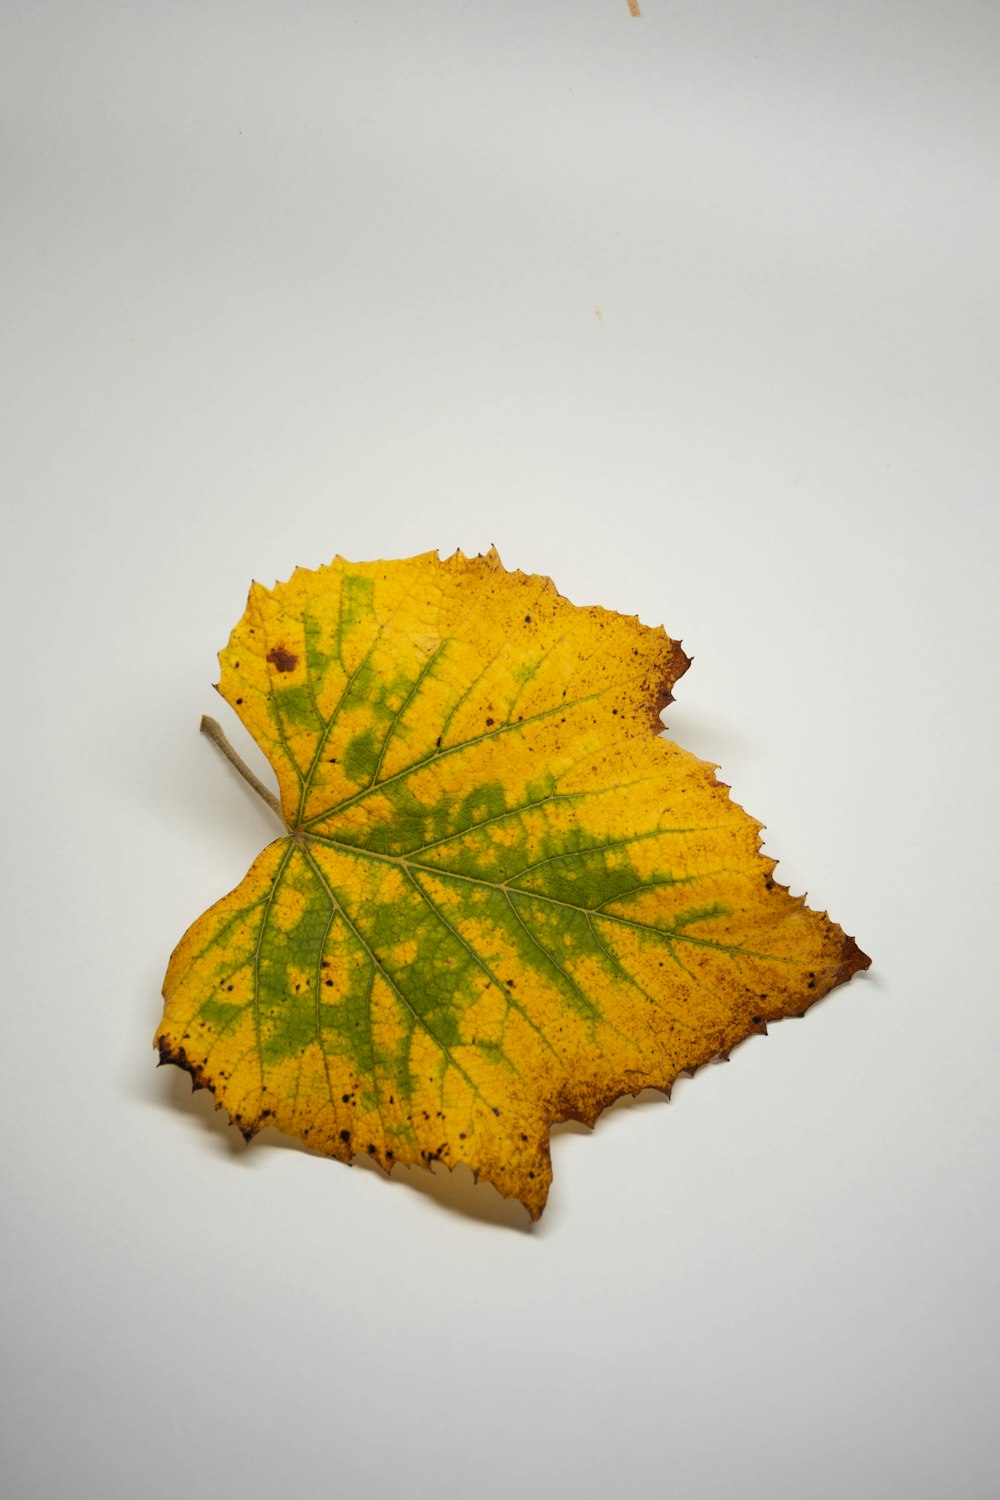 yellow maple leaf on white surface